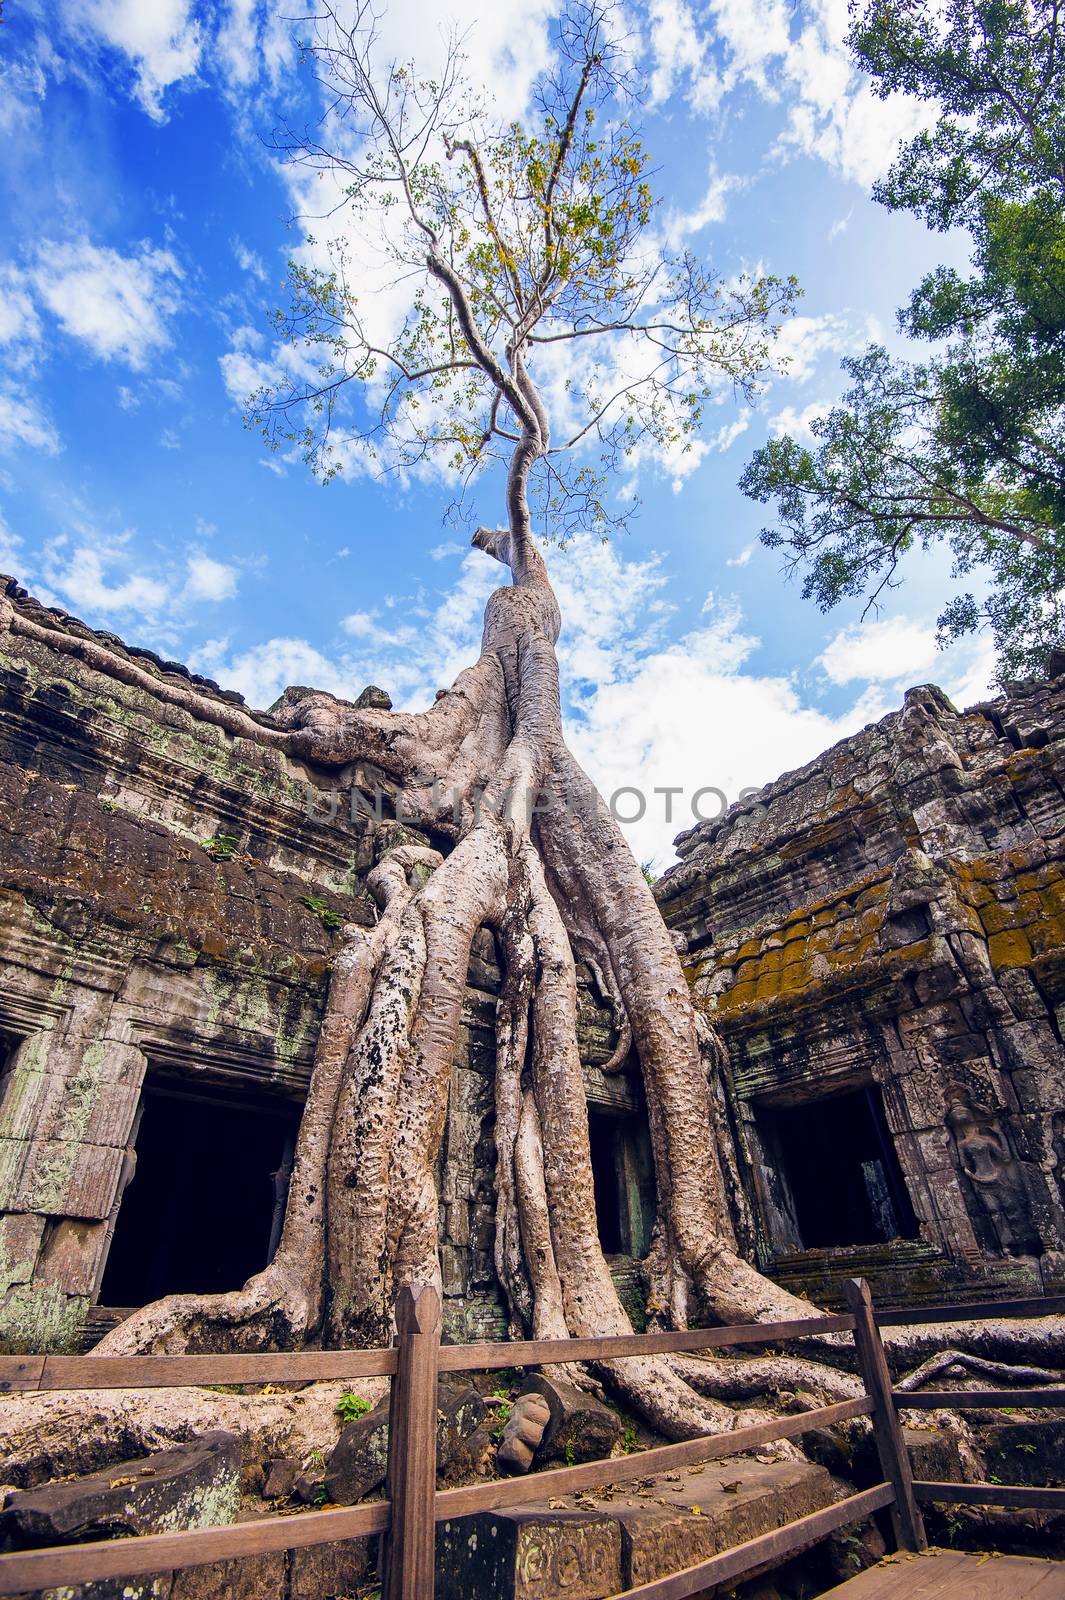 Trees growing out of Ta Prohm temple, Angkor Wat in Cambodia. by gutarphotoghaphy